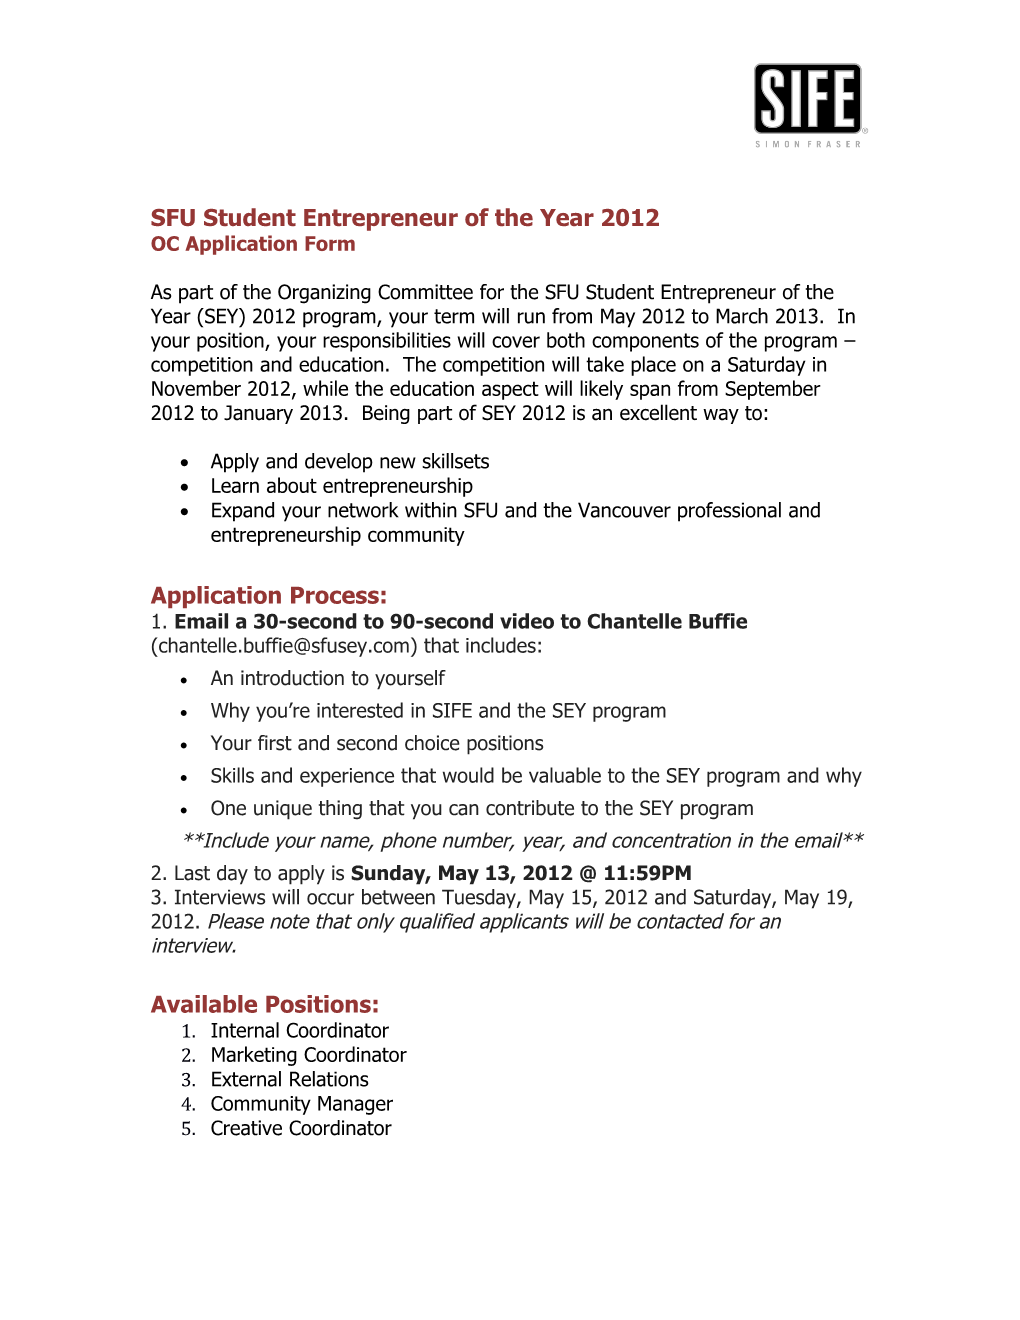 SFU Student Entrepreneur of the Year 2012 OC Application Form